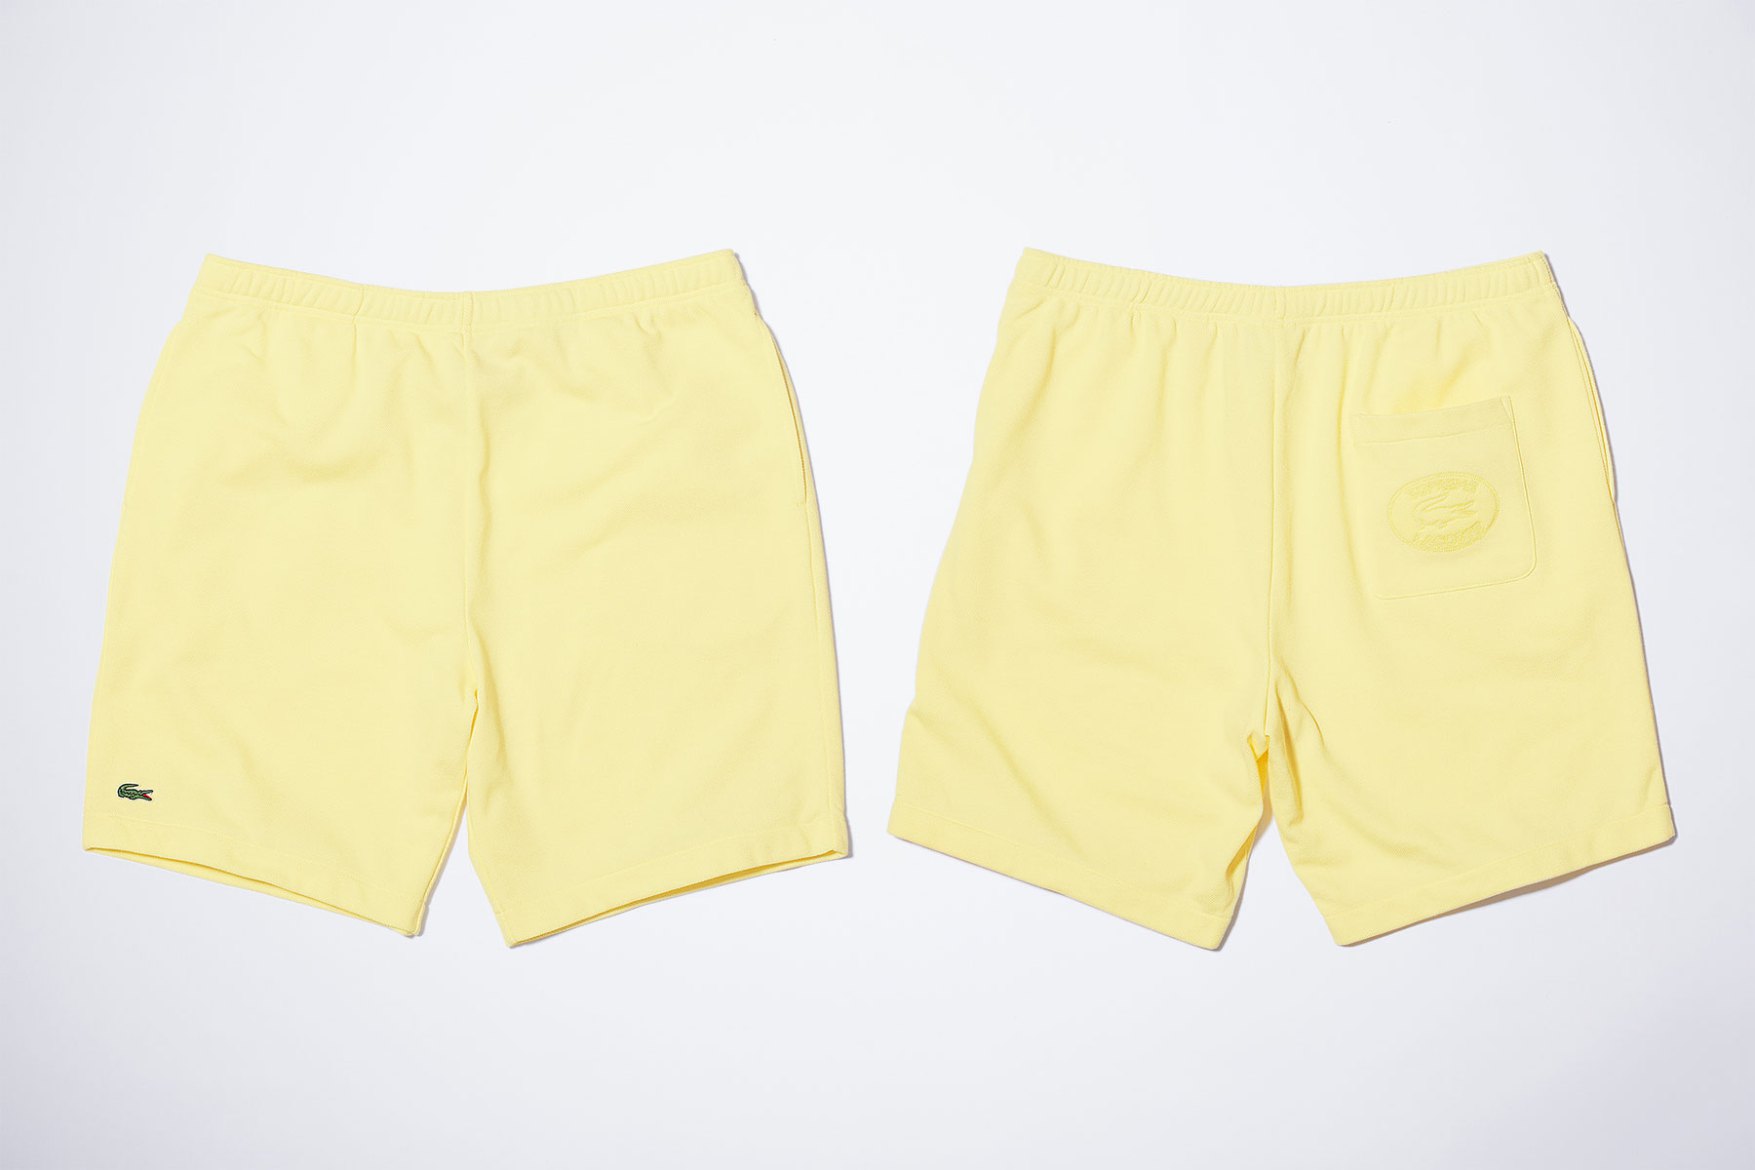 lacoste-supreme-yellow-shorts-2017-spring-summer-17.jpg